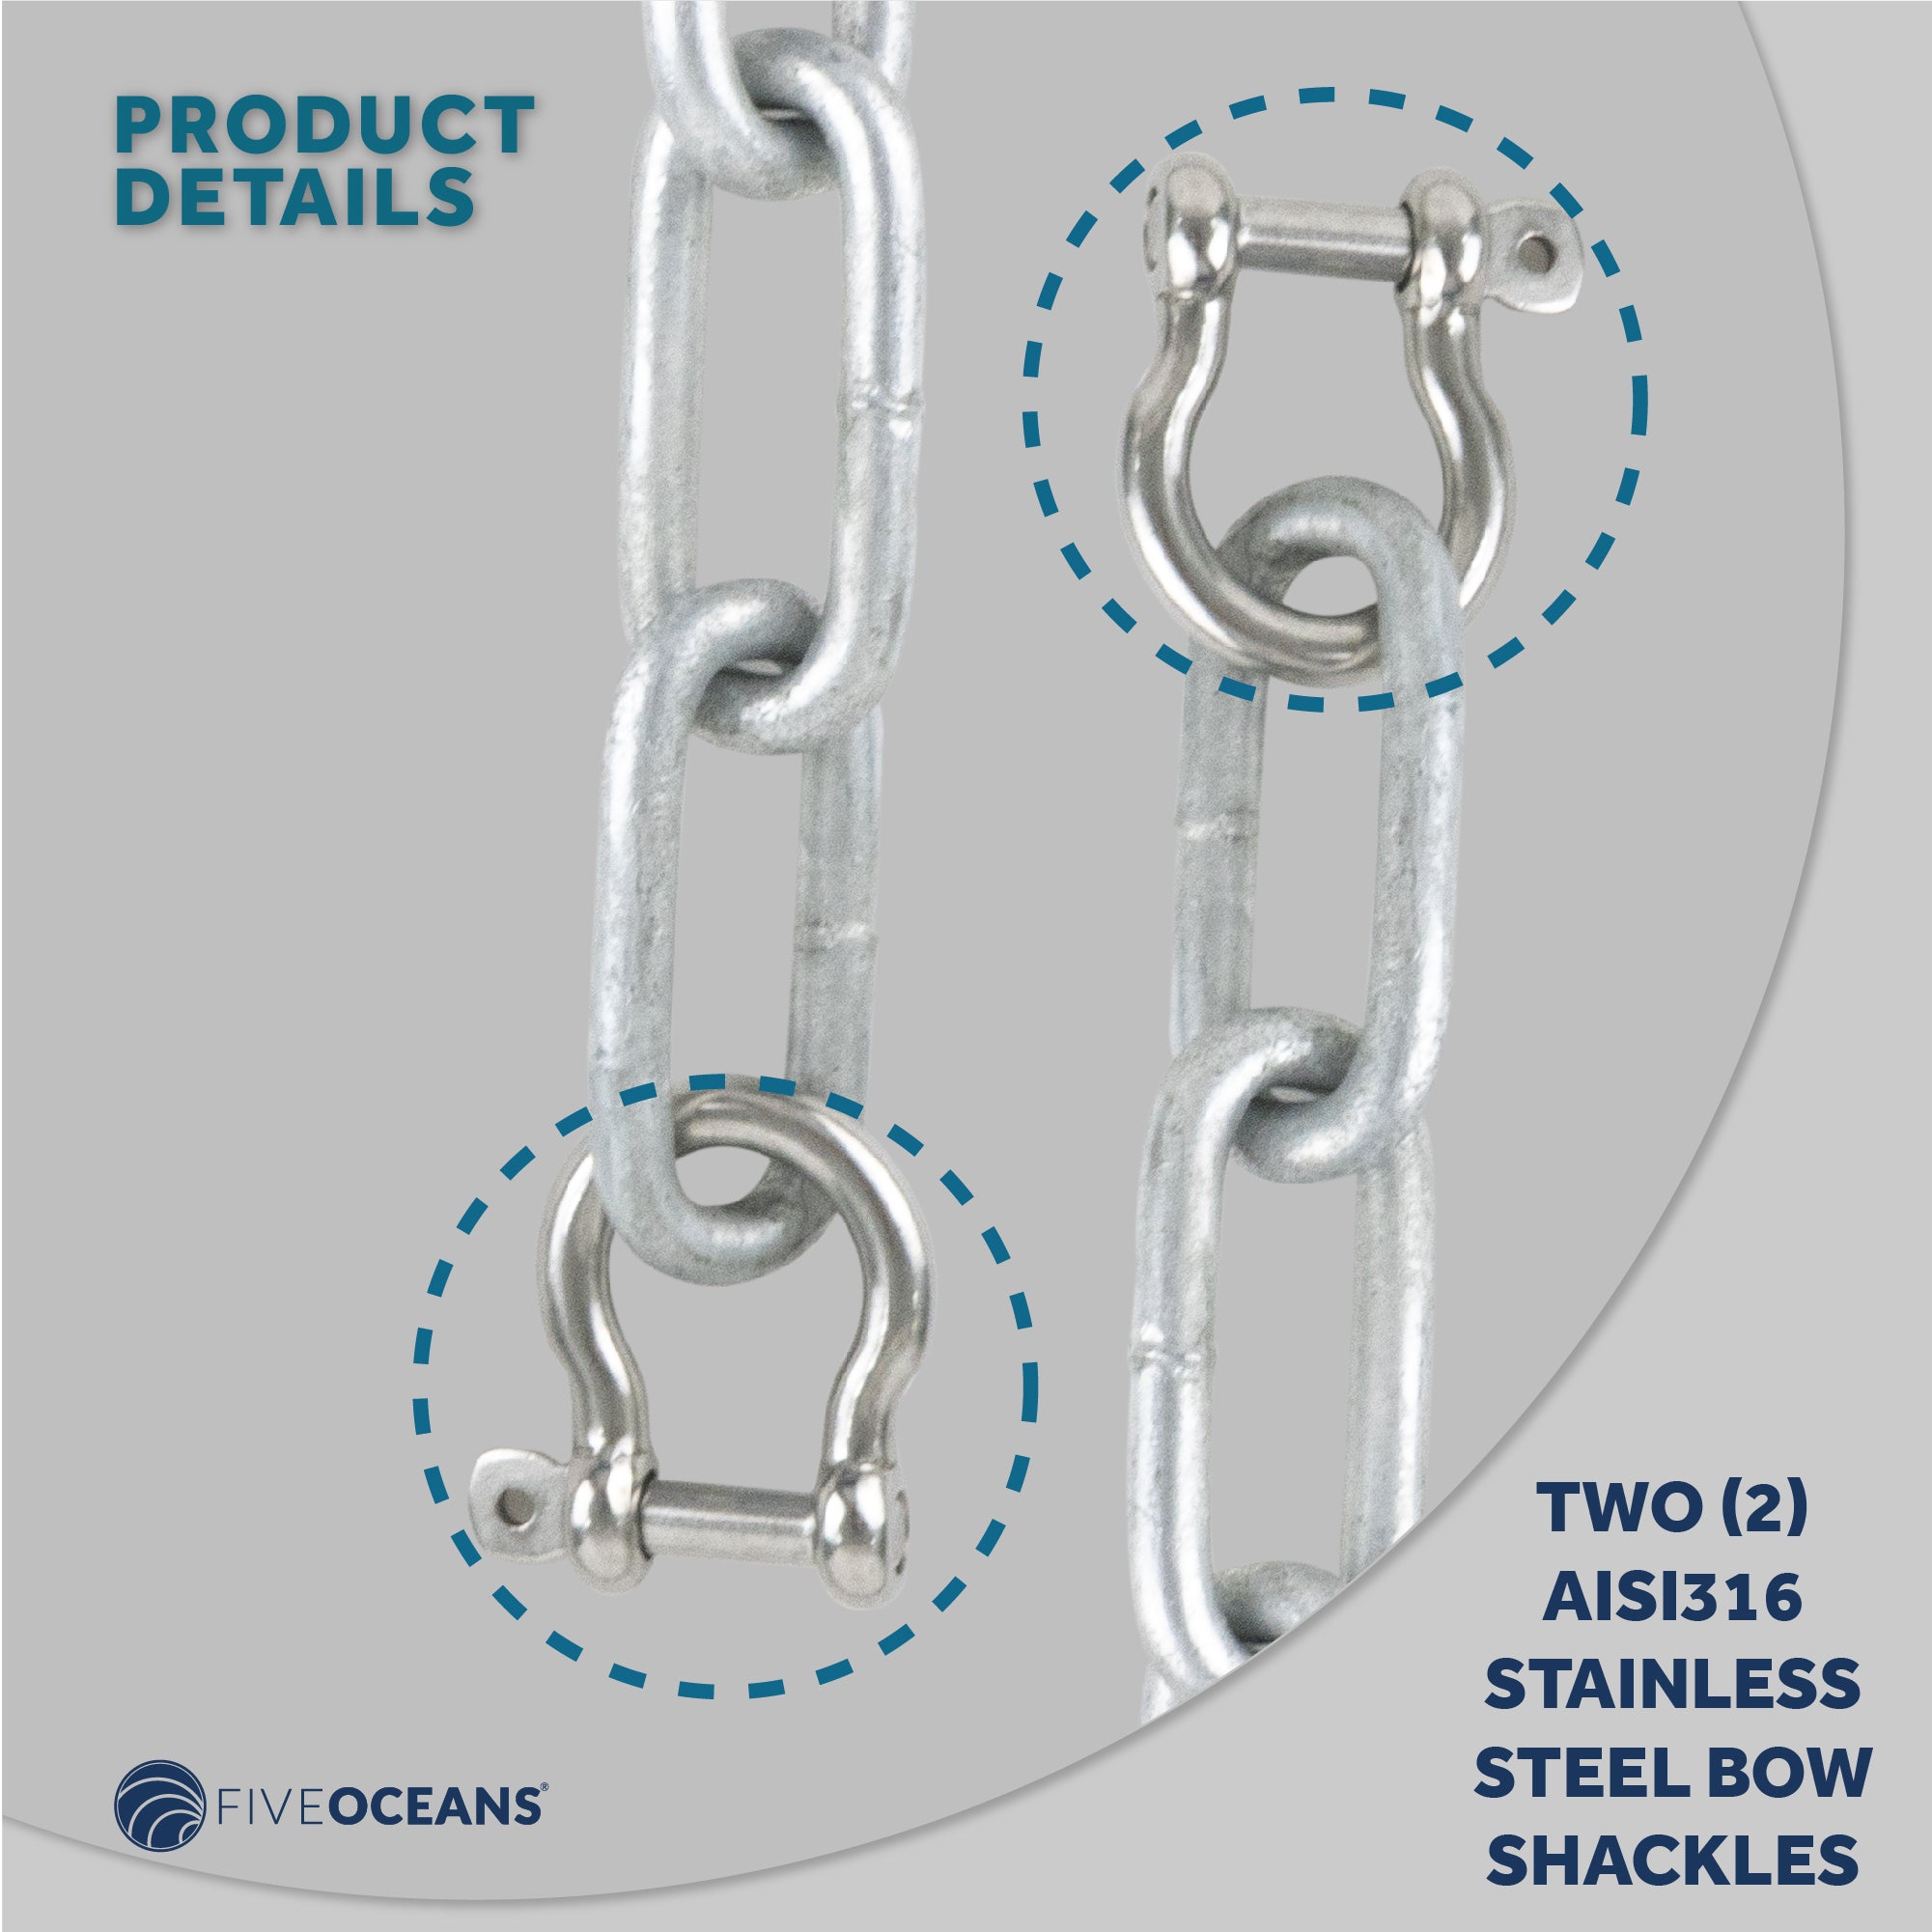 Marine Boat Anchor Lead Chain 5/16 inches x 5 Feet Hot-Dipped Galvanized Steel with 2 AISI316 Stainless Steel 5/16 inches Bow Shackles FO4569-GN5